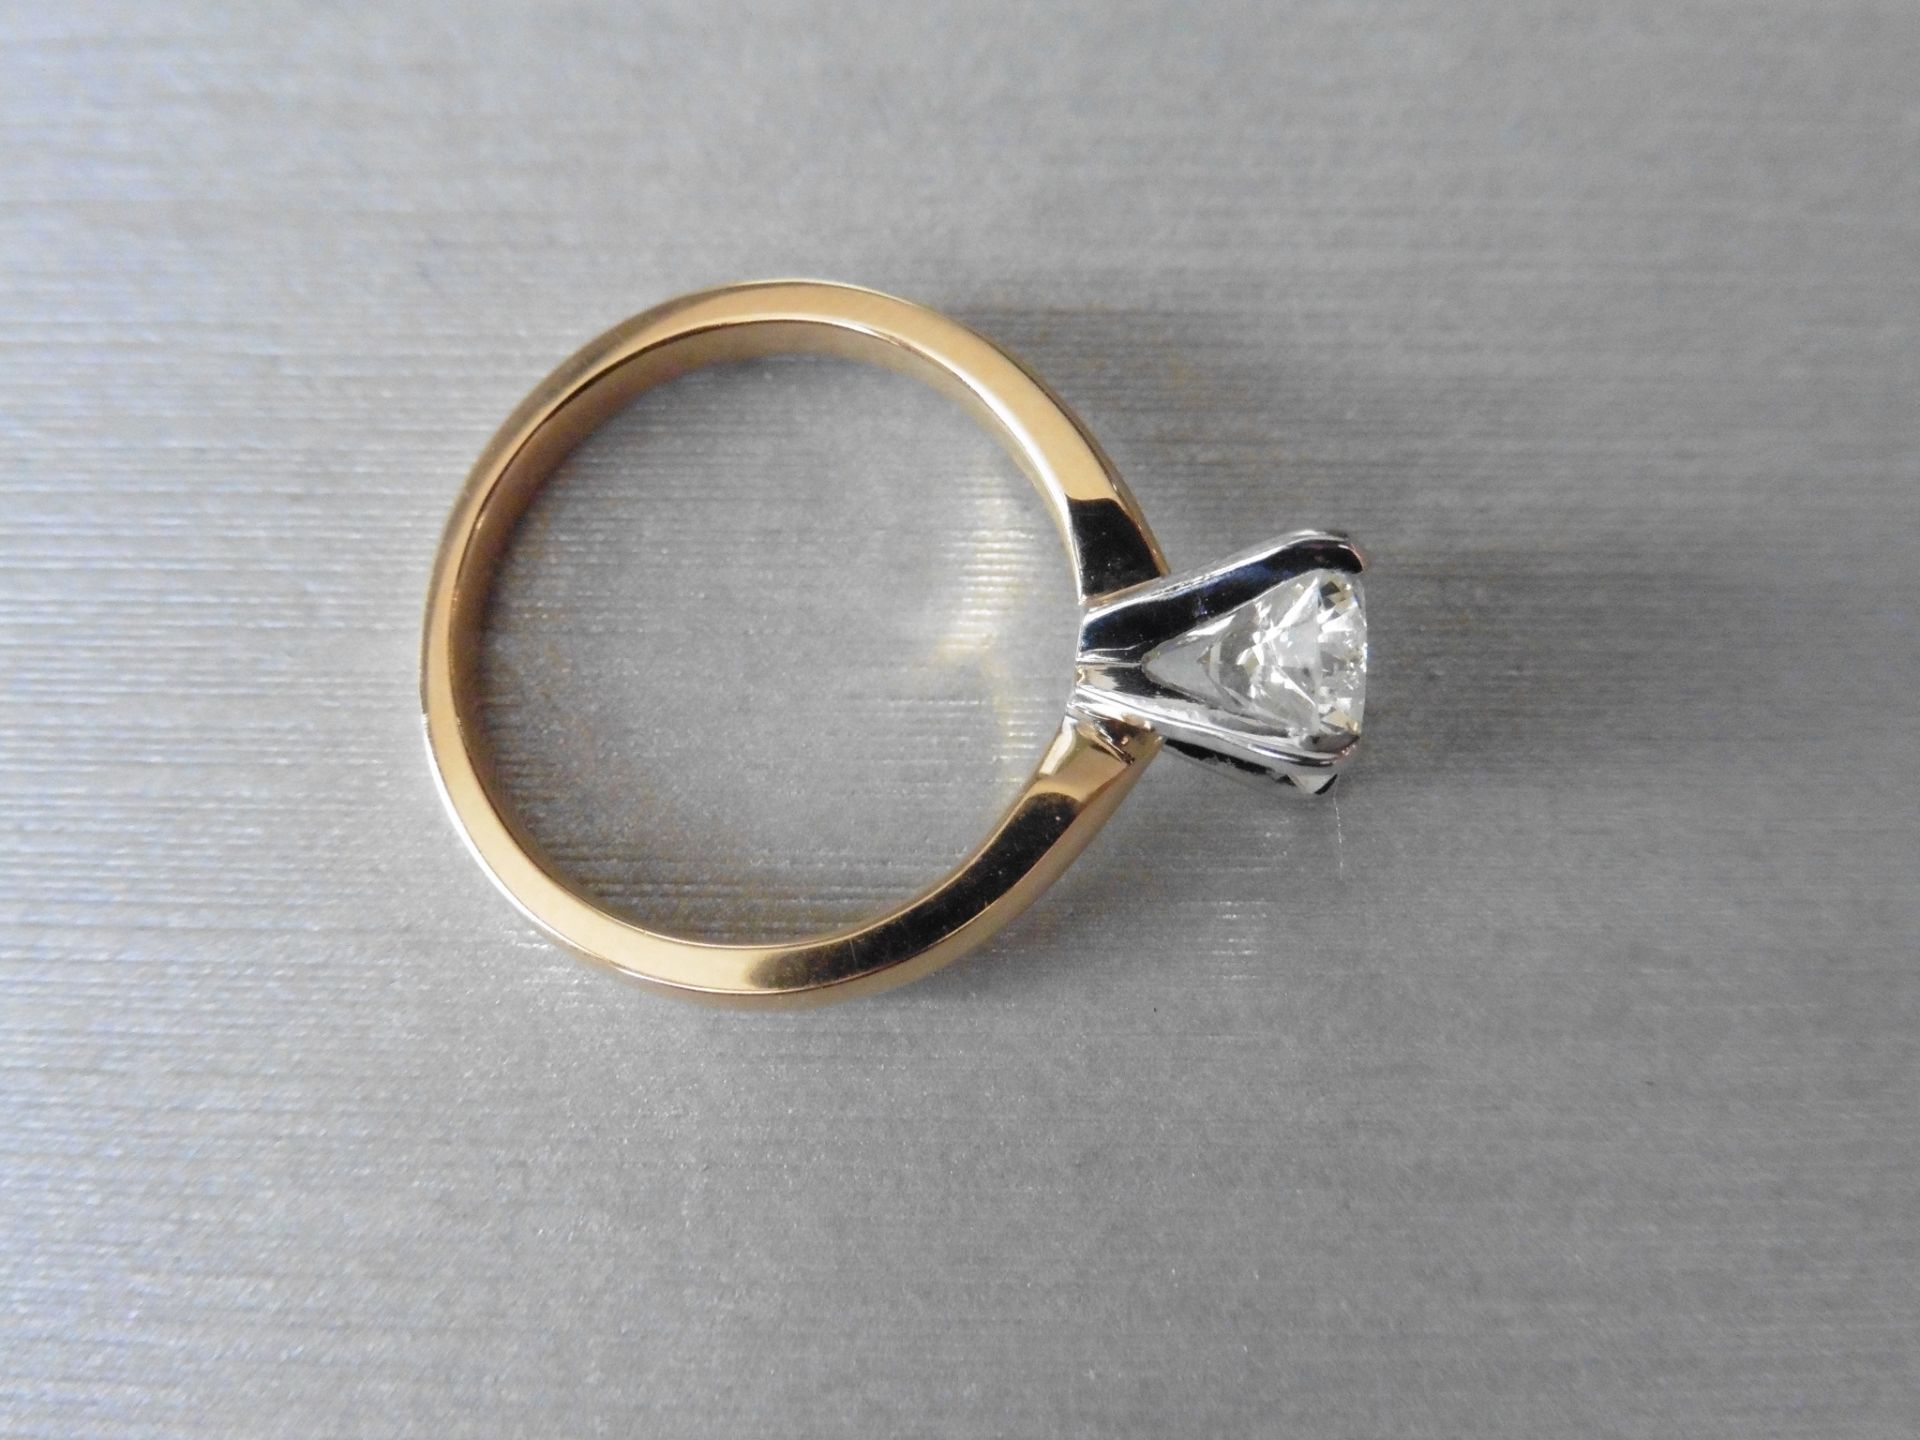 1ct Diamond Solitaire Ring - Image 3 of 3